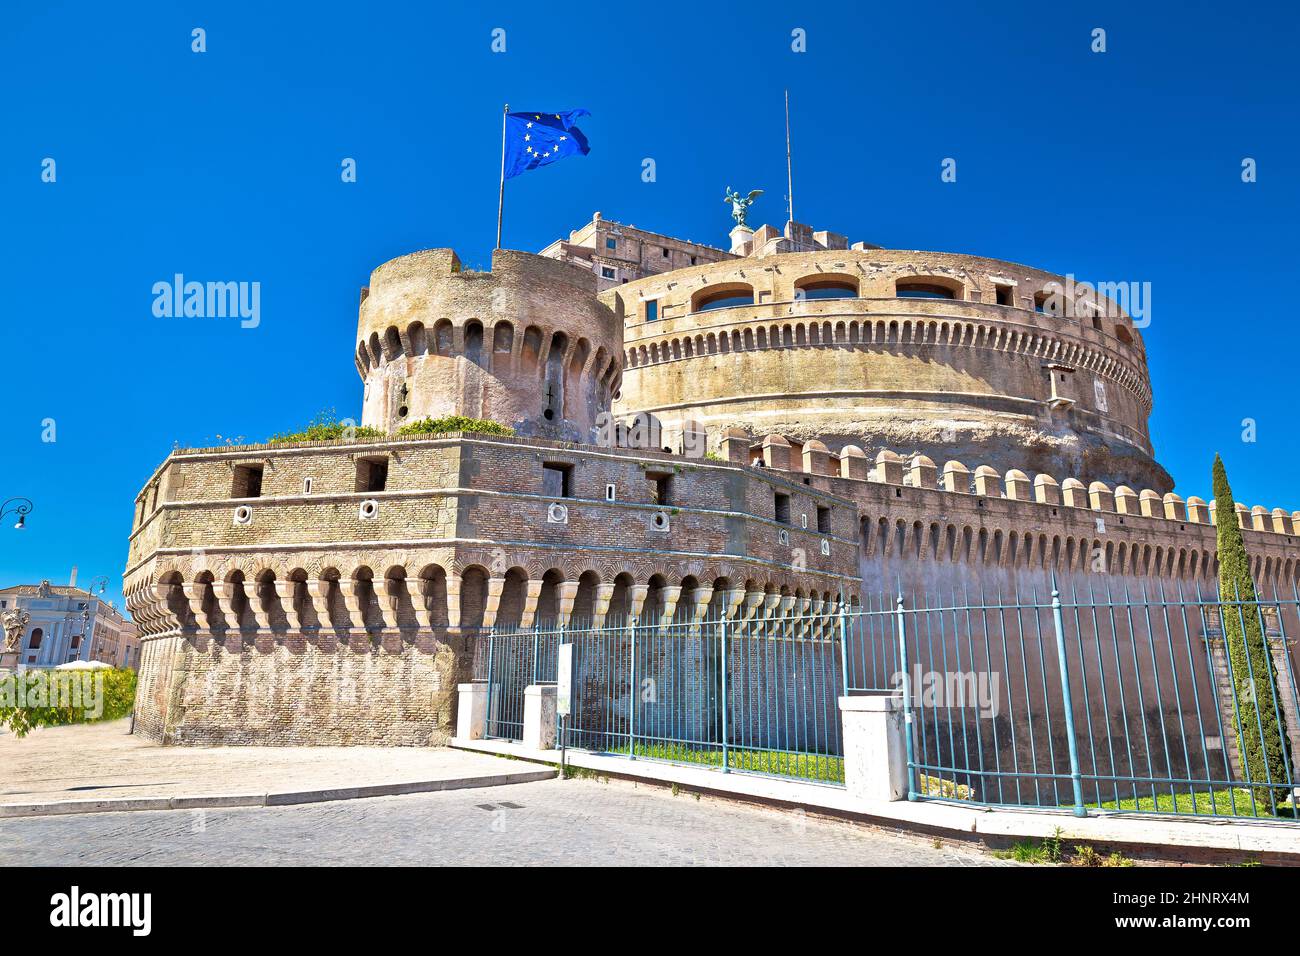 Castel Sant Angelo or The Mausoleum of Hadrian on Tiber river in Rome Stock Photo